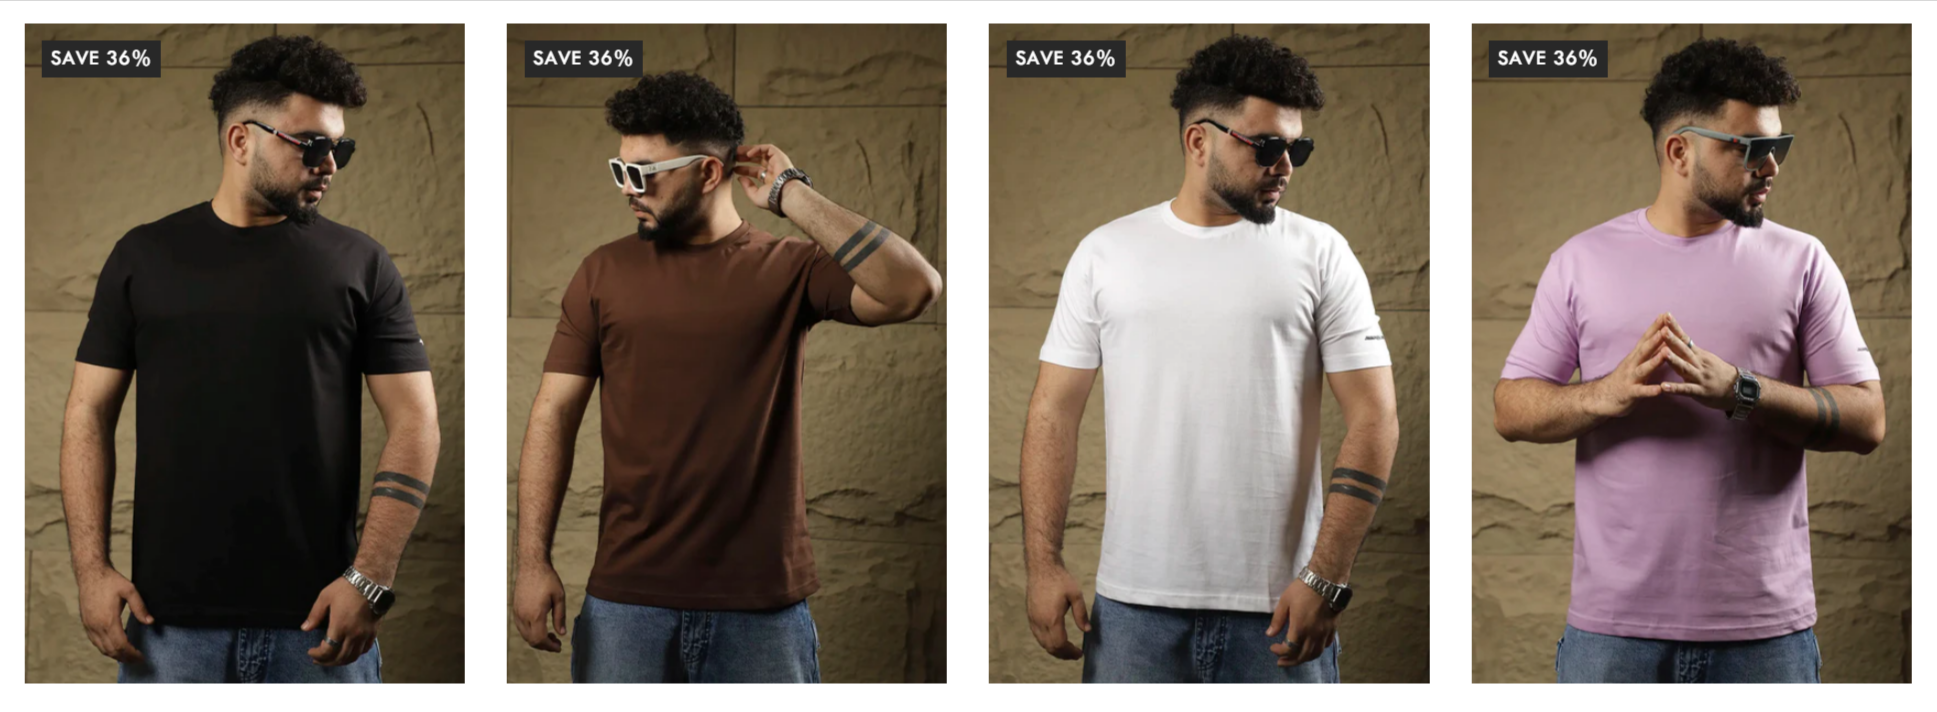 Style Made Simple with Jimmy Luxury's Plain Cotton T-shirts